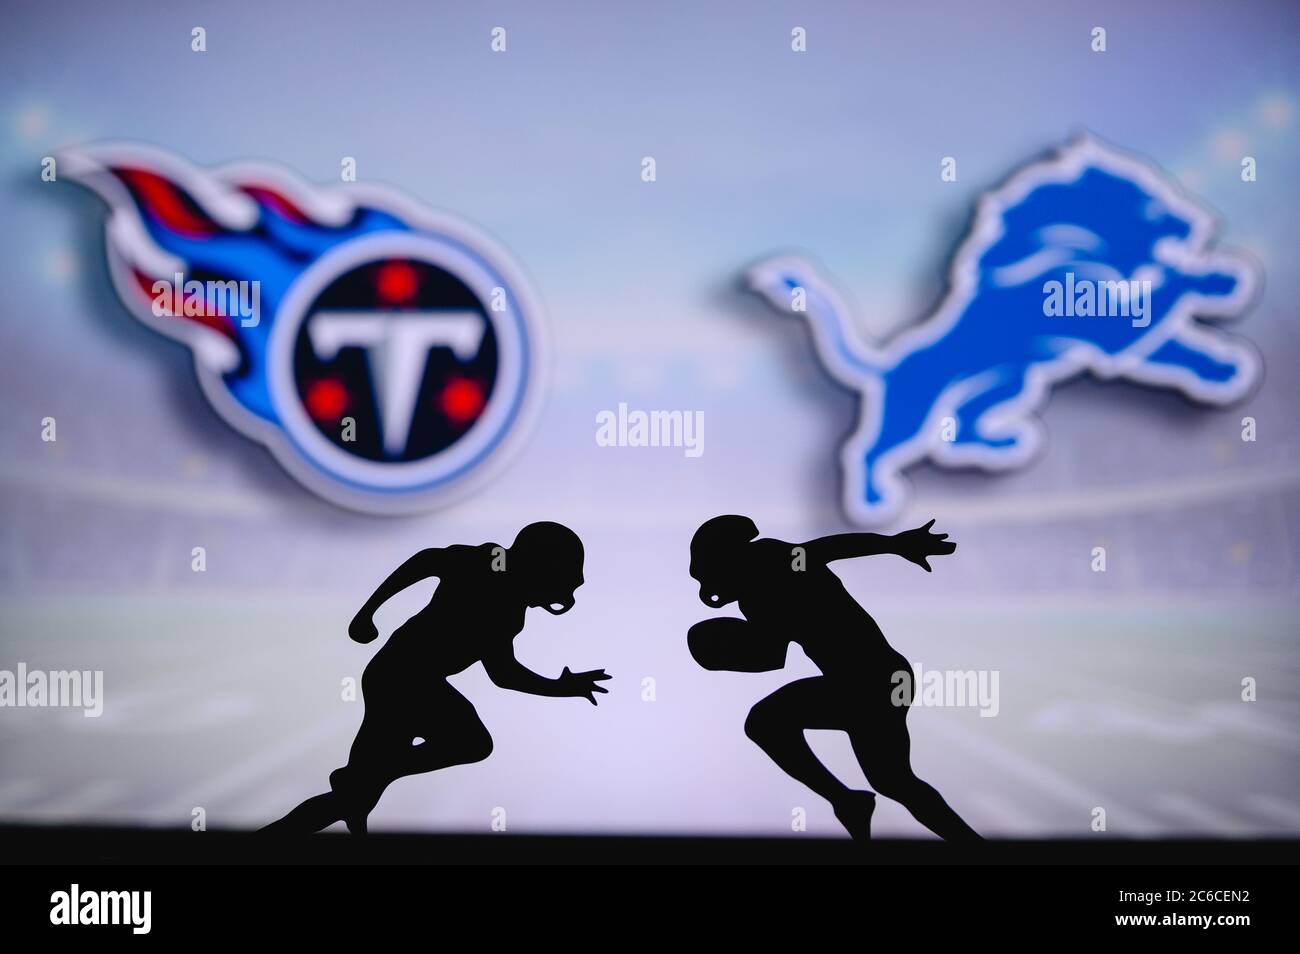 Tennessee Titans vs. Detroit Lions. NFL match poster. Two american football players silhouette facing each other on the field. Clubs logo in backgroun Stock Photo